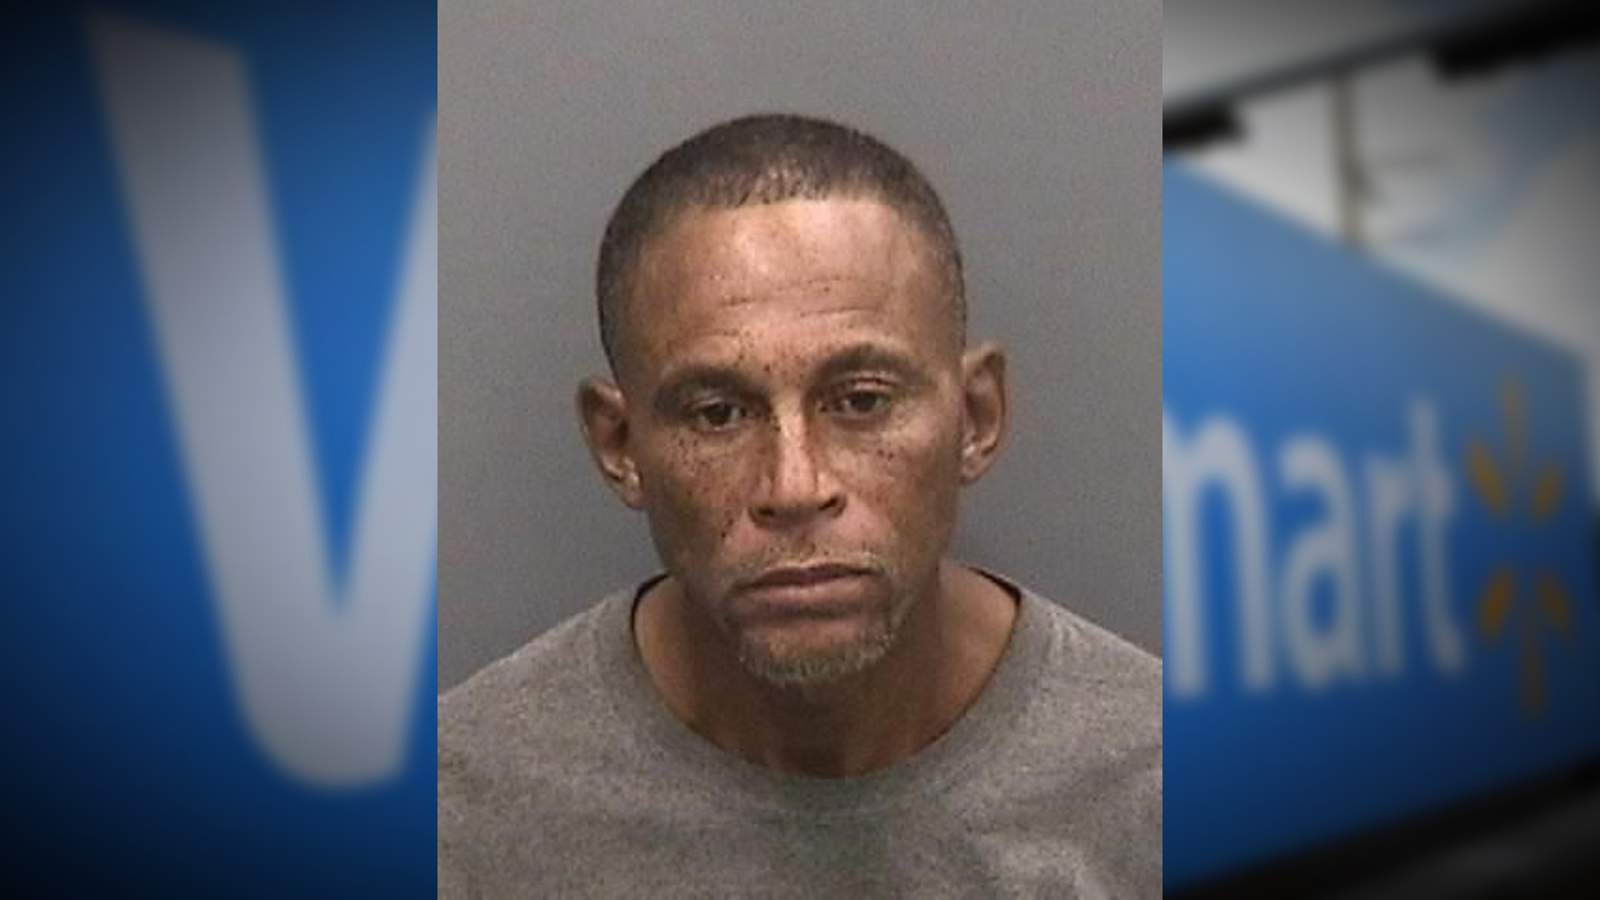 Hillsborough deputies arrest man for claiming to have a bomb at Walmart